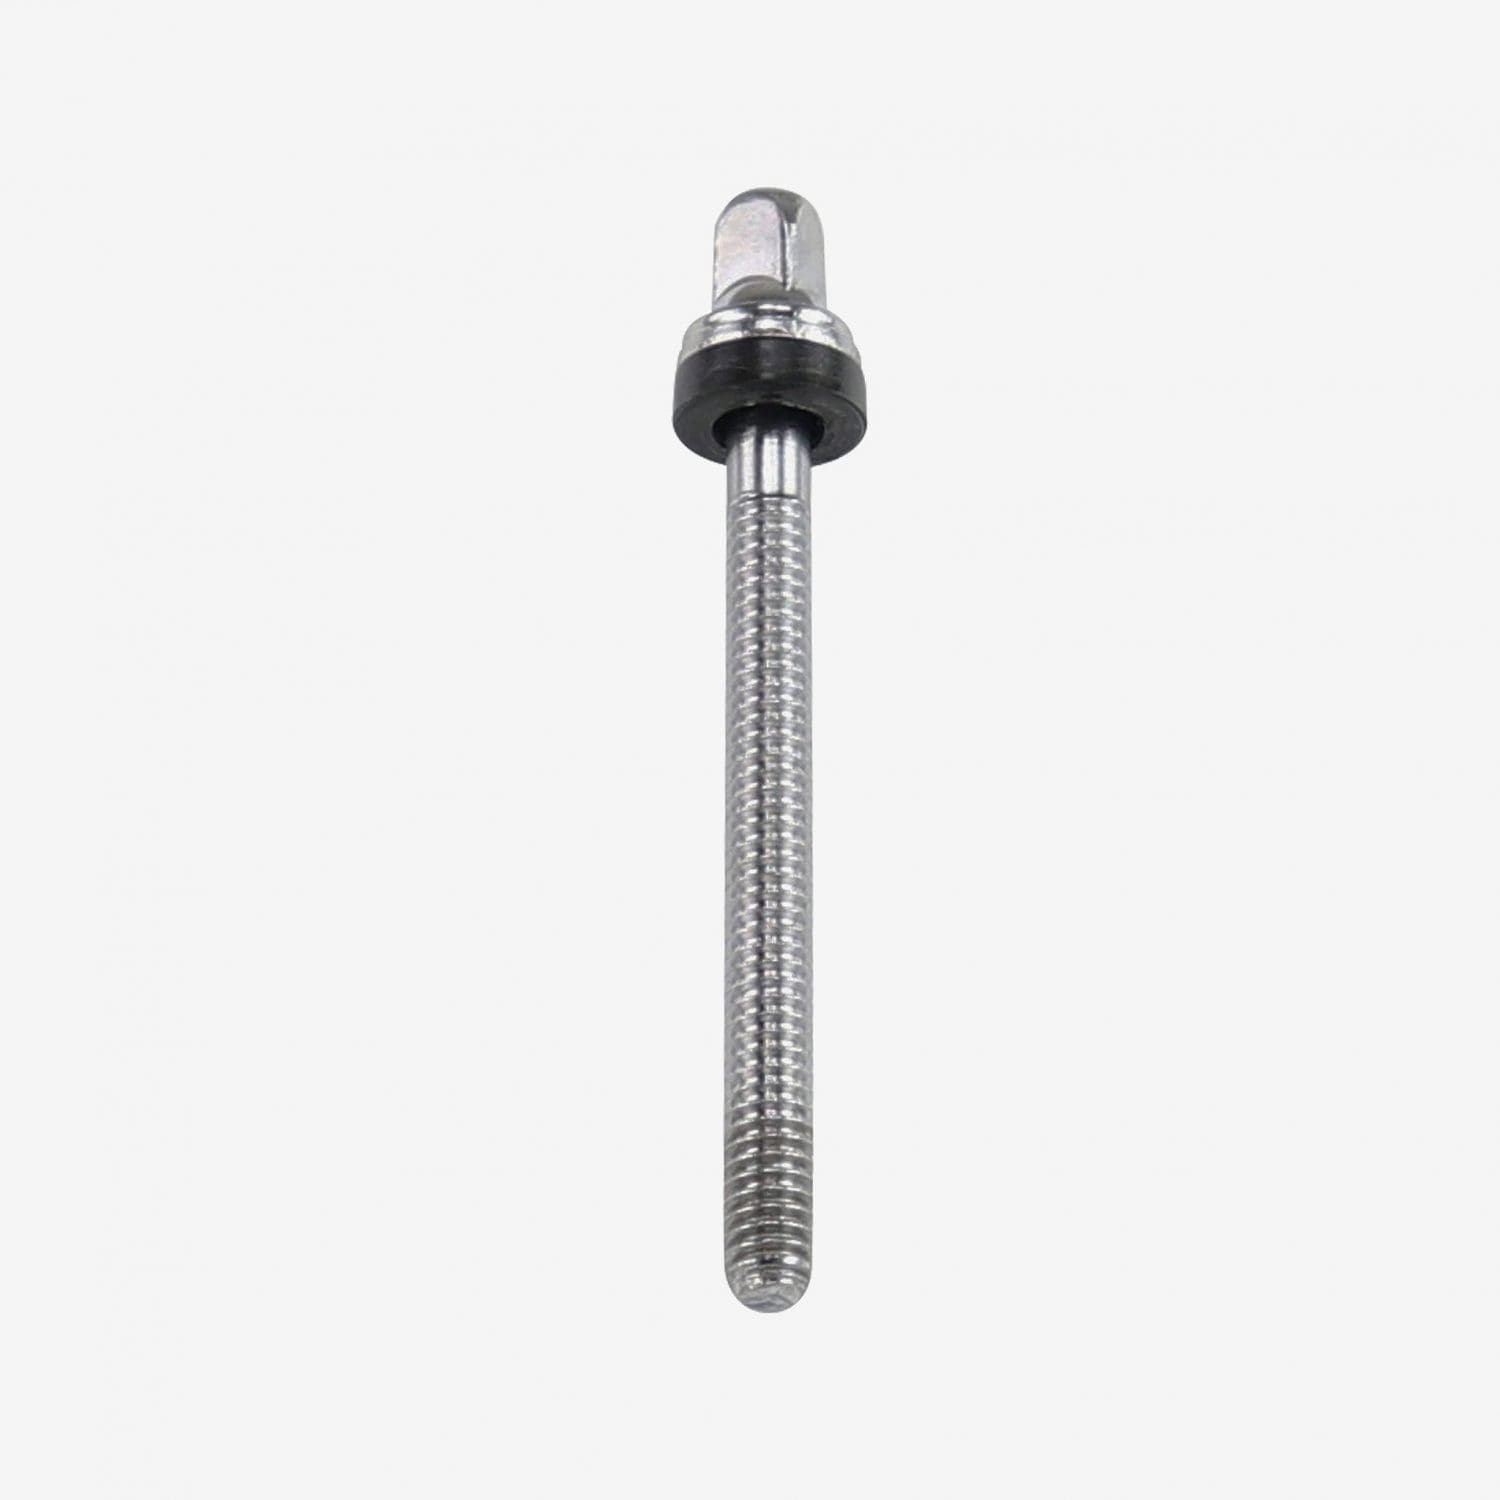 20-Pack 2 1/2 inch Tension Rods